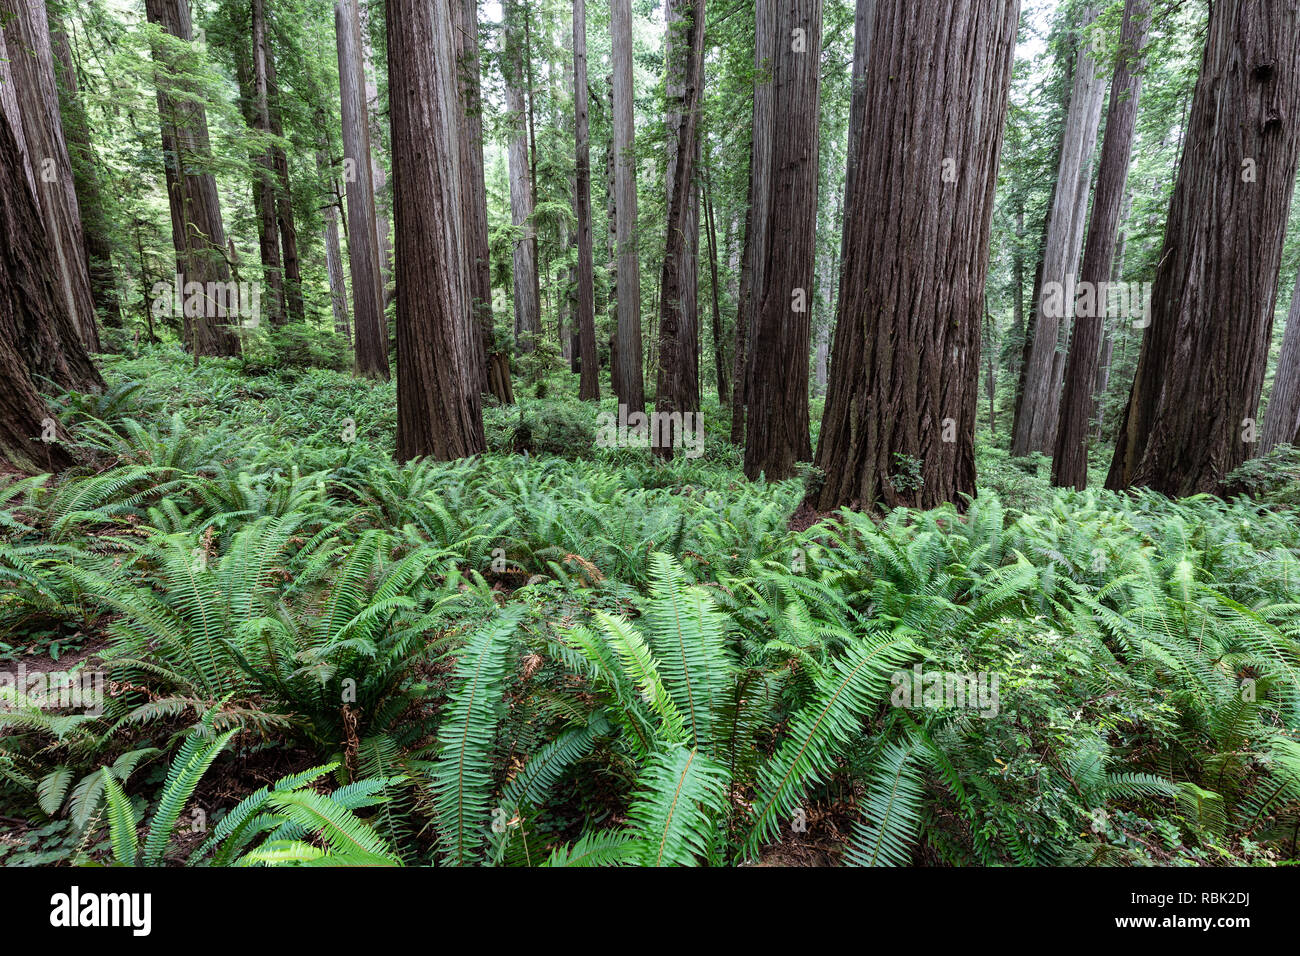 A grove of coast redwood trees (Sequoia sempervirens) grows above a blanket of ferns in Jedediah Redwoods State Park, California. Stock Photo